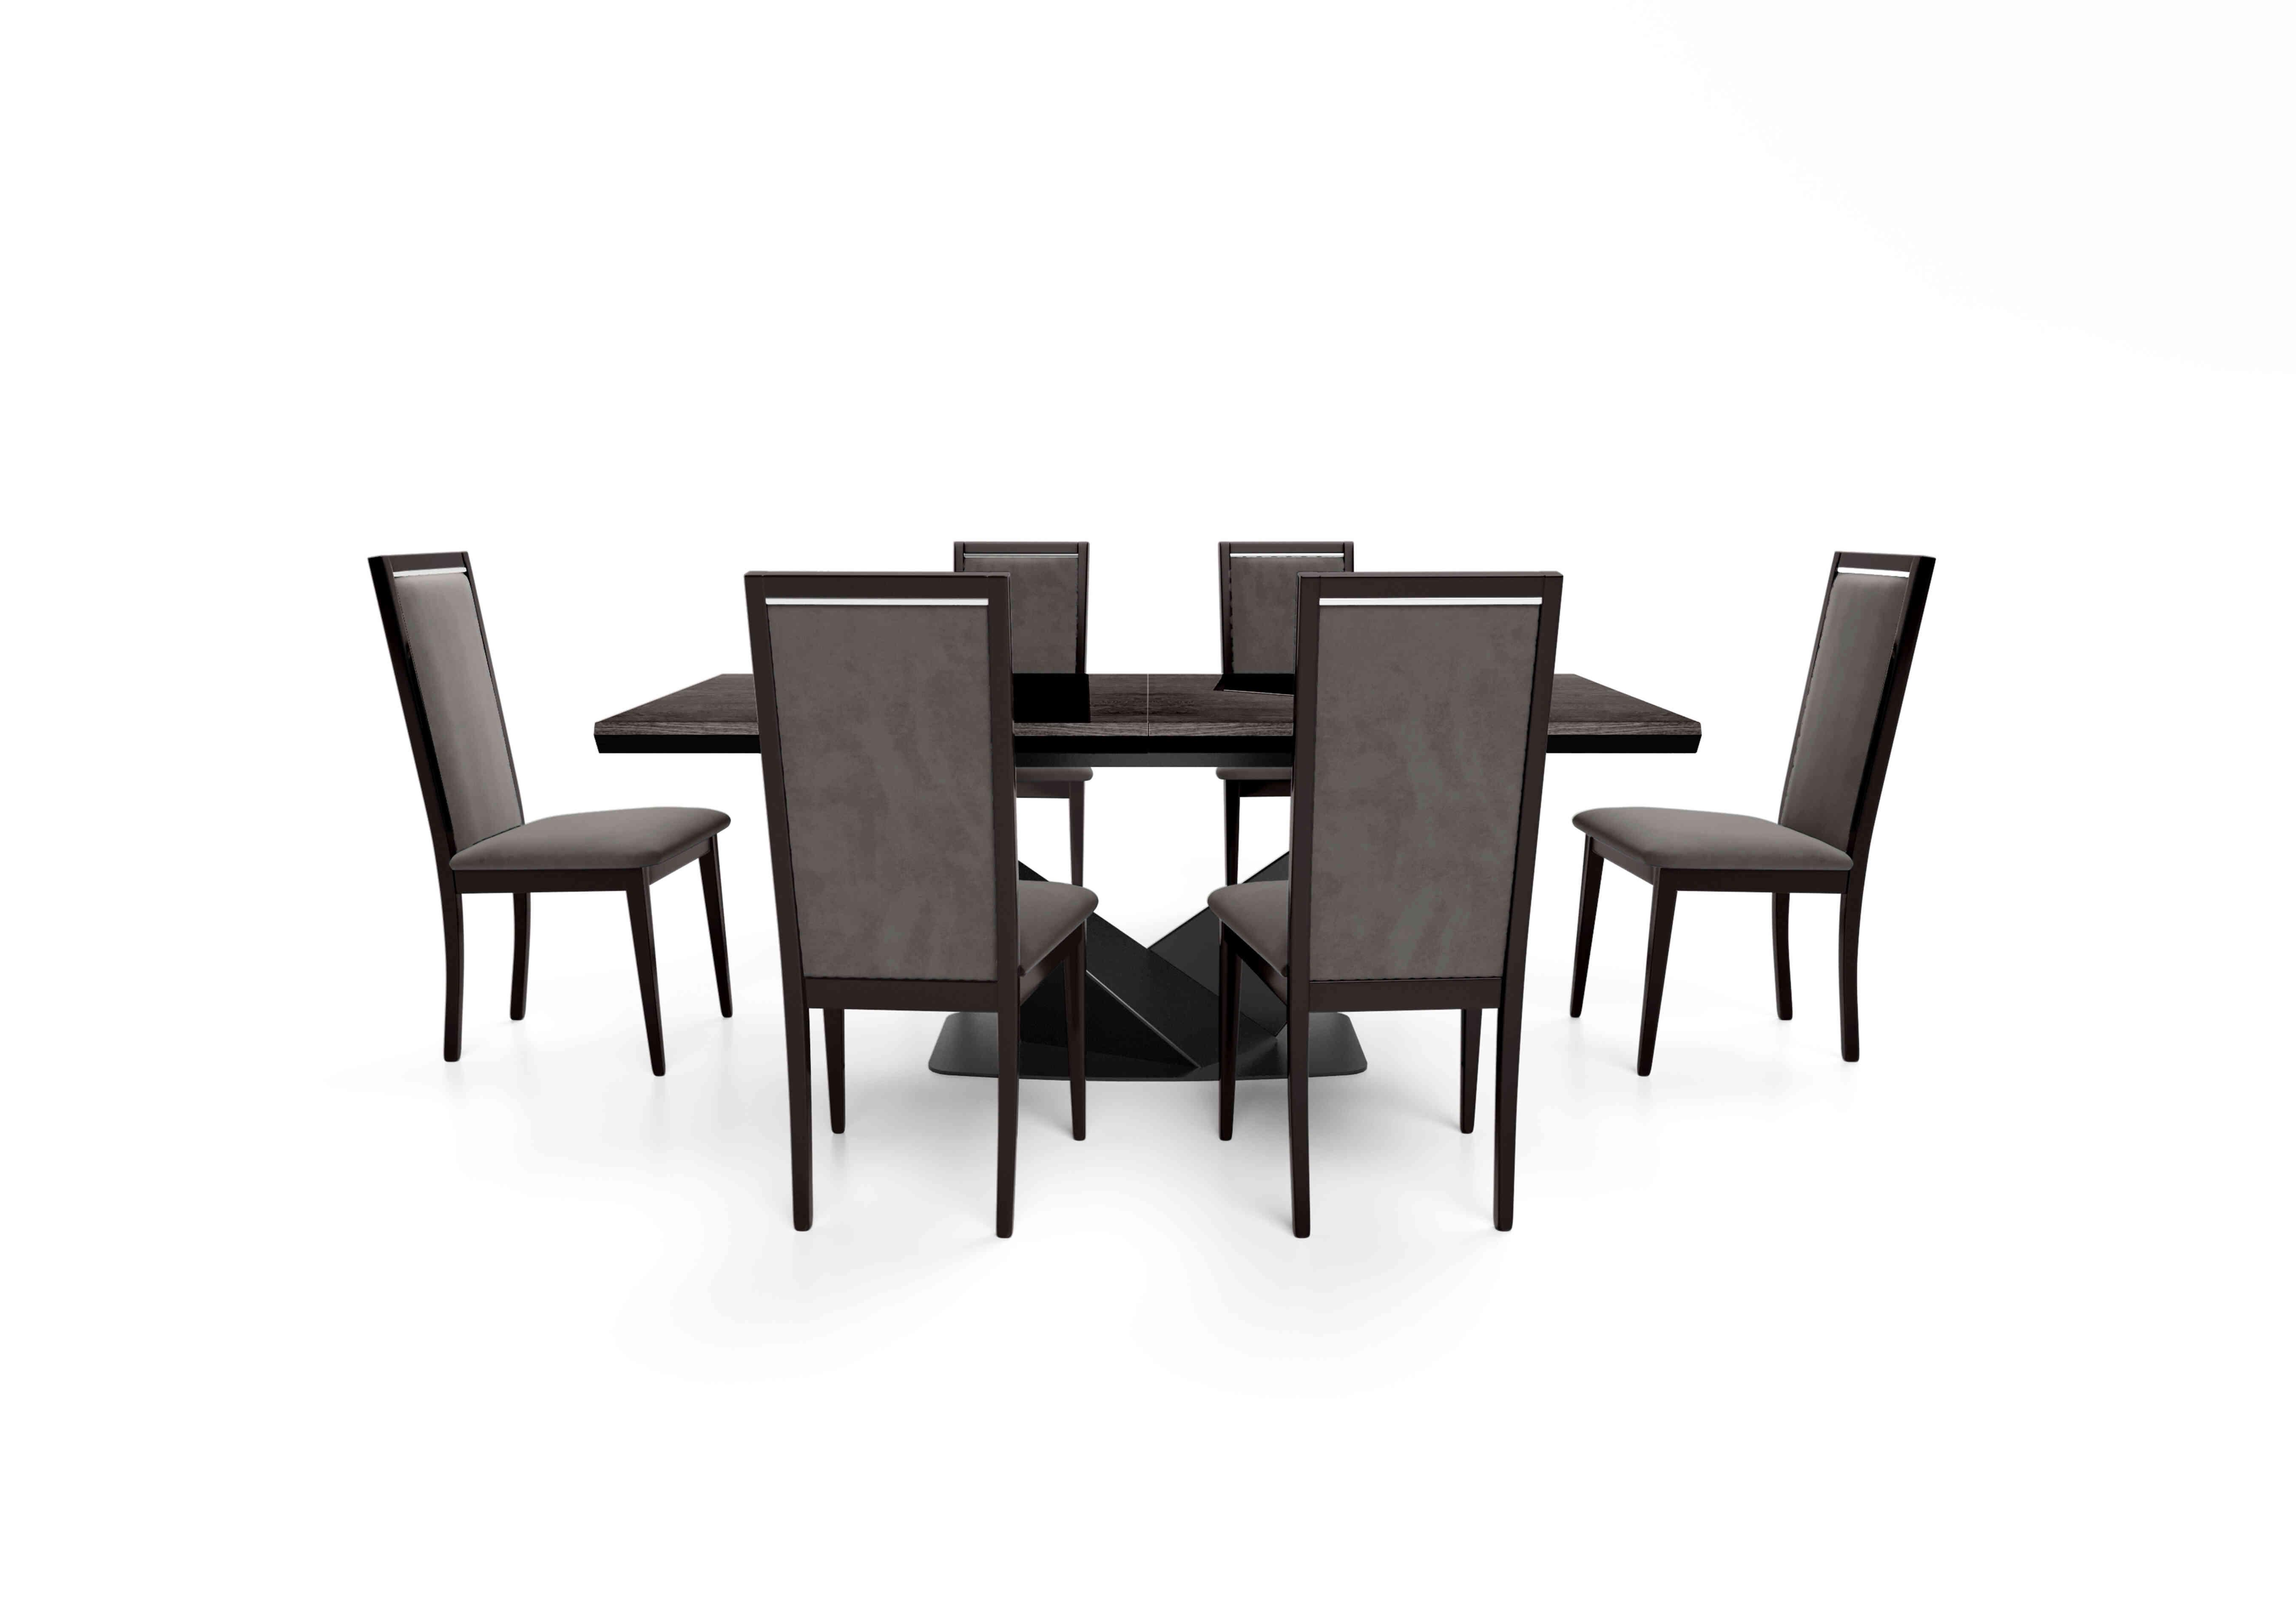 Vita Extending Dining Table and 6 Wooden Dining Chairs with Plain Upholstered Backs in Miraglio 205 Granite on Furniture Village